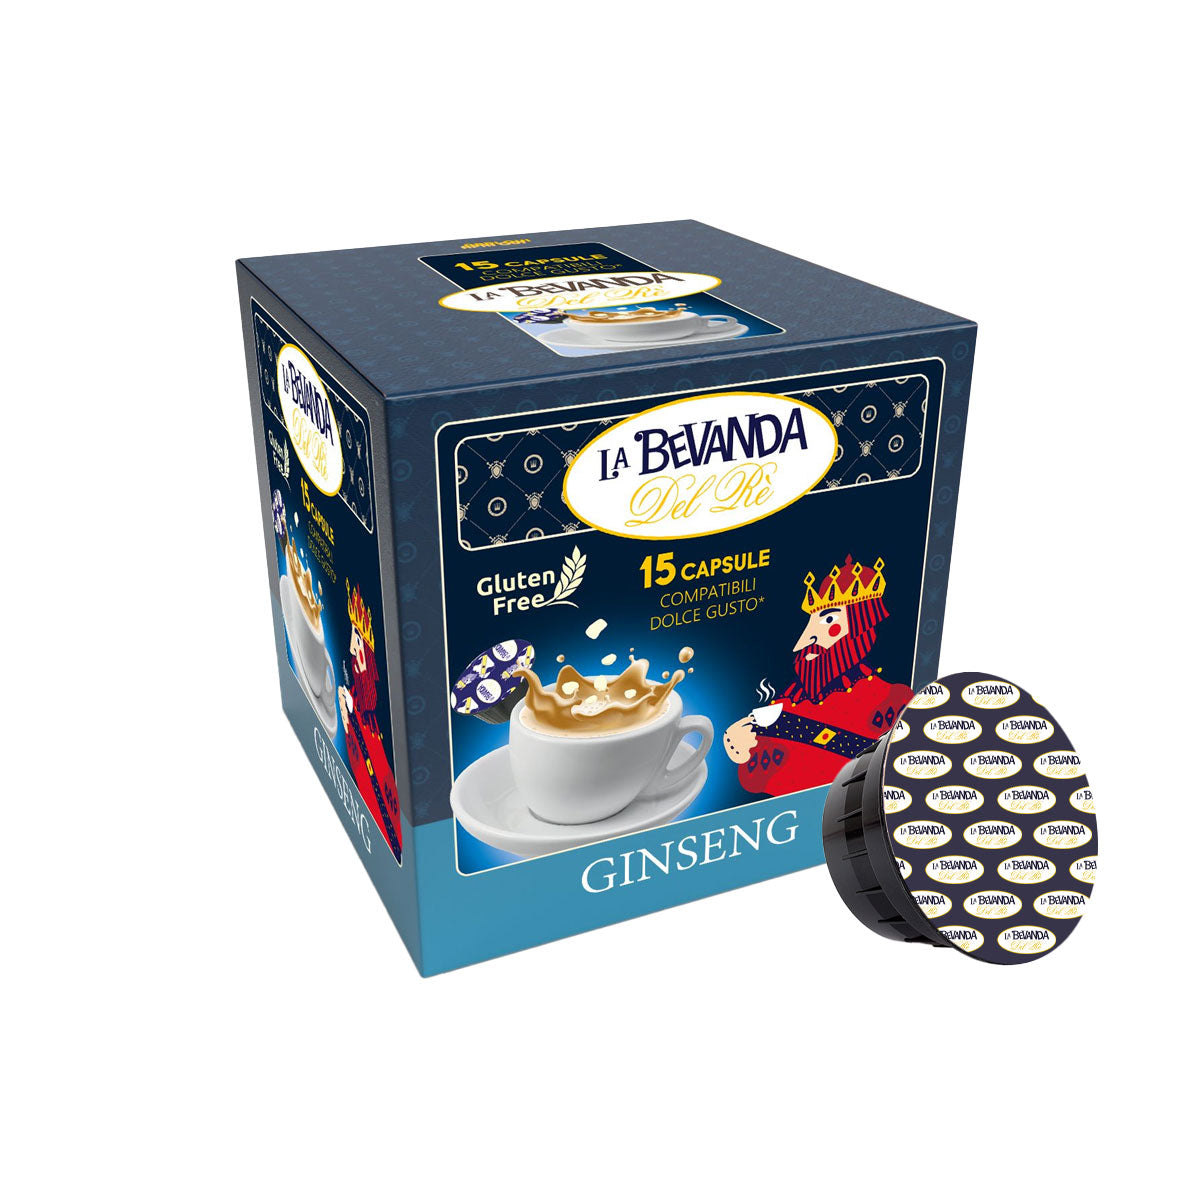 15 Capsule Dolce Gusto - Ginseng